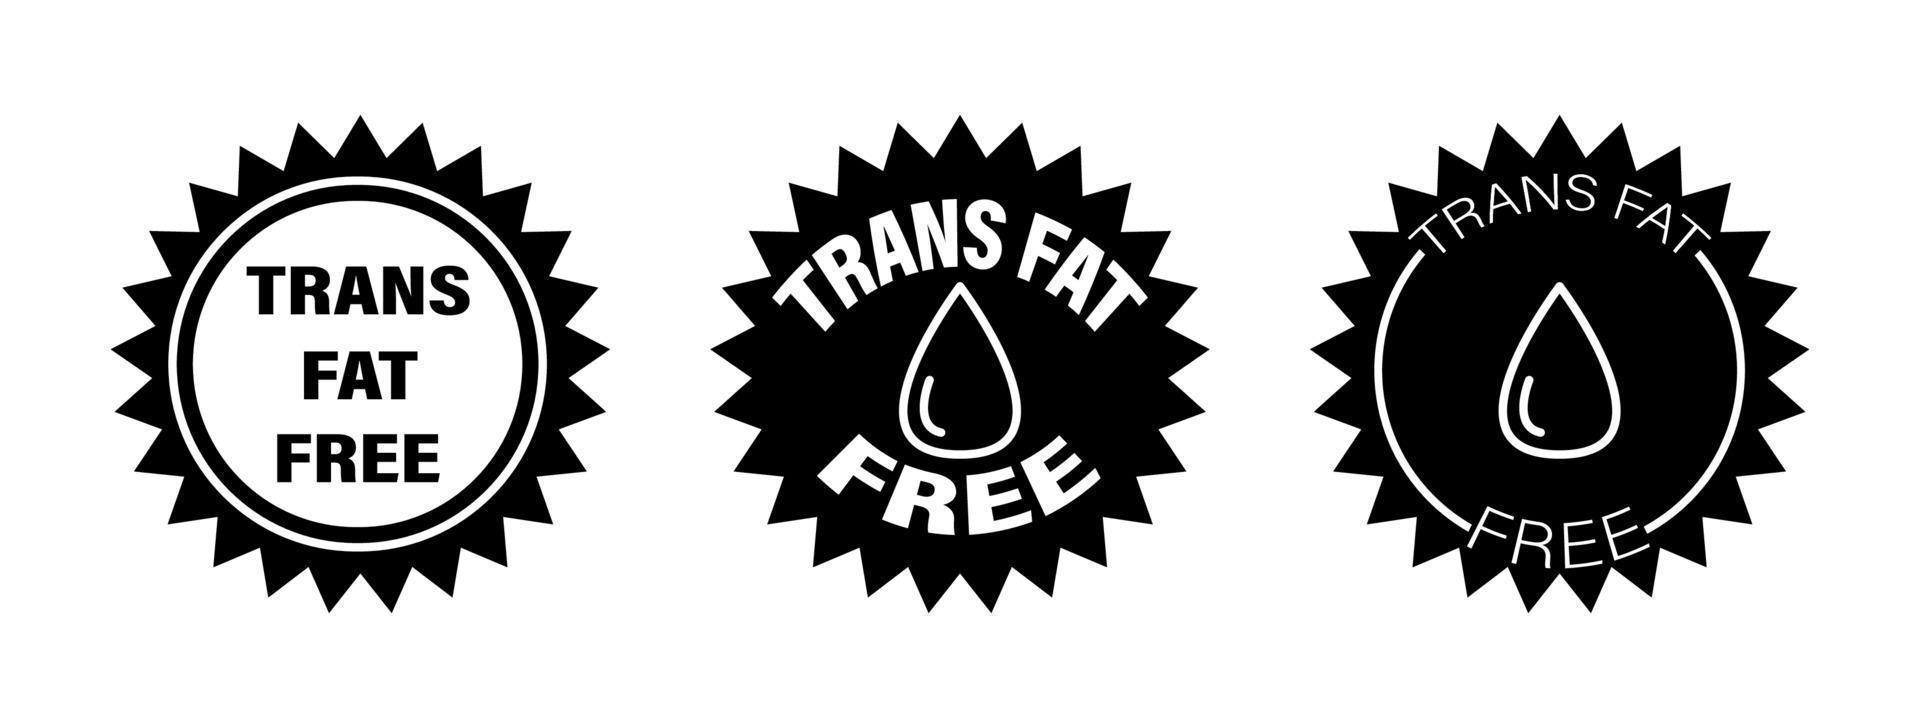 Trans fat free. Set of round icons with a drop vector